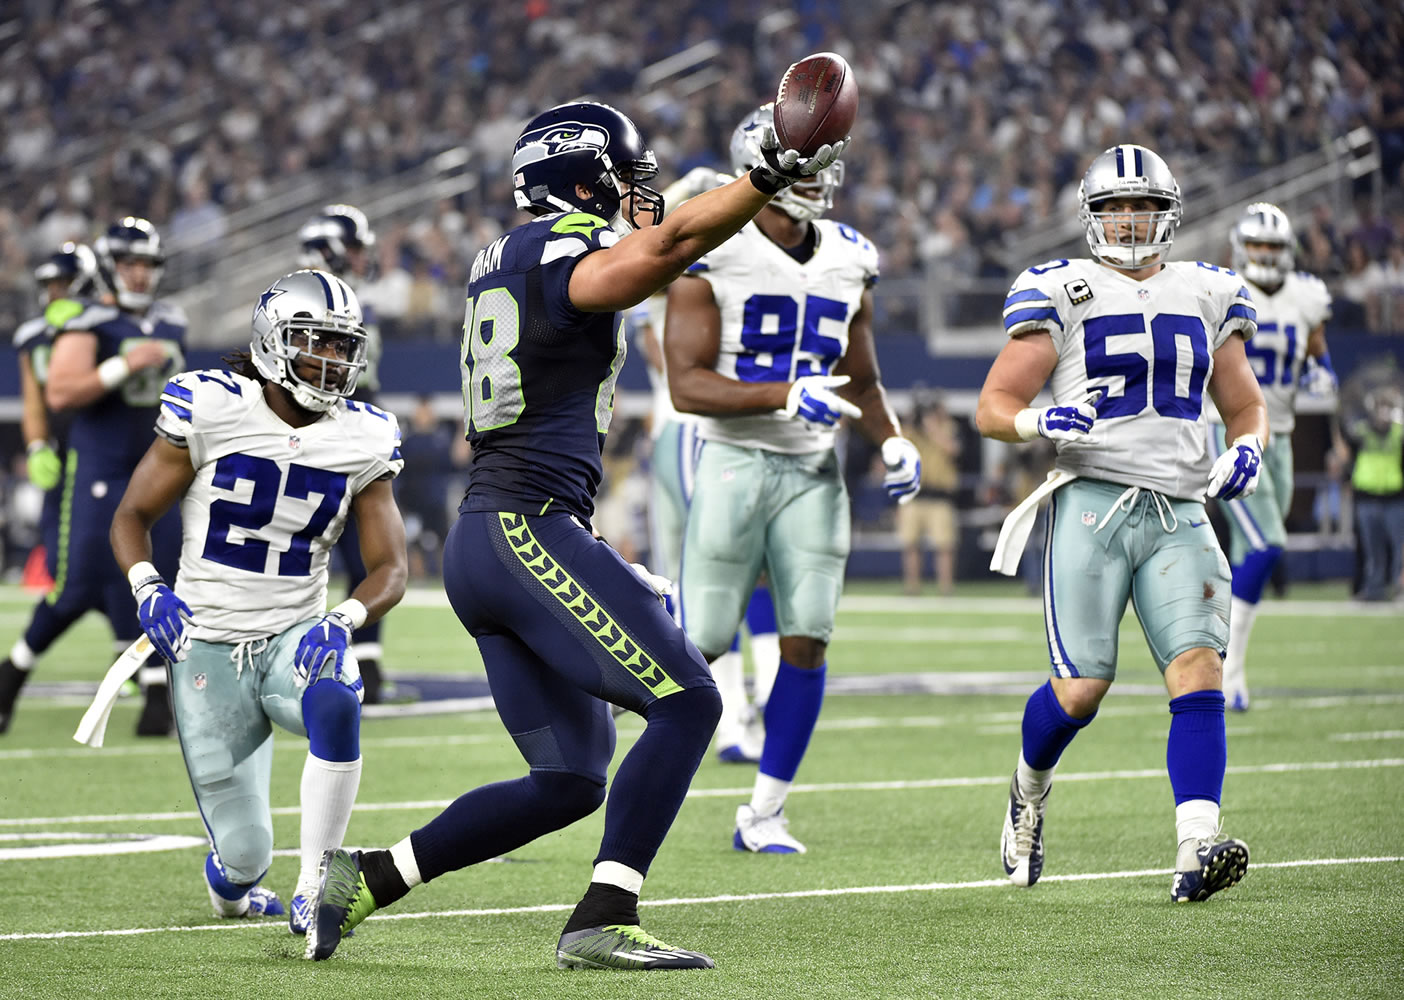 Seattle Seahawks' Jimmy Graham (88) celebrates after catching a long pass as Dallas Cowboys' J.J. Wilcox (27), David Irving (95) and Sean Lee (50) watch in the second half of an NFL football game Sunday, Nov. 1, 2015, in Arlington, Texas.